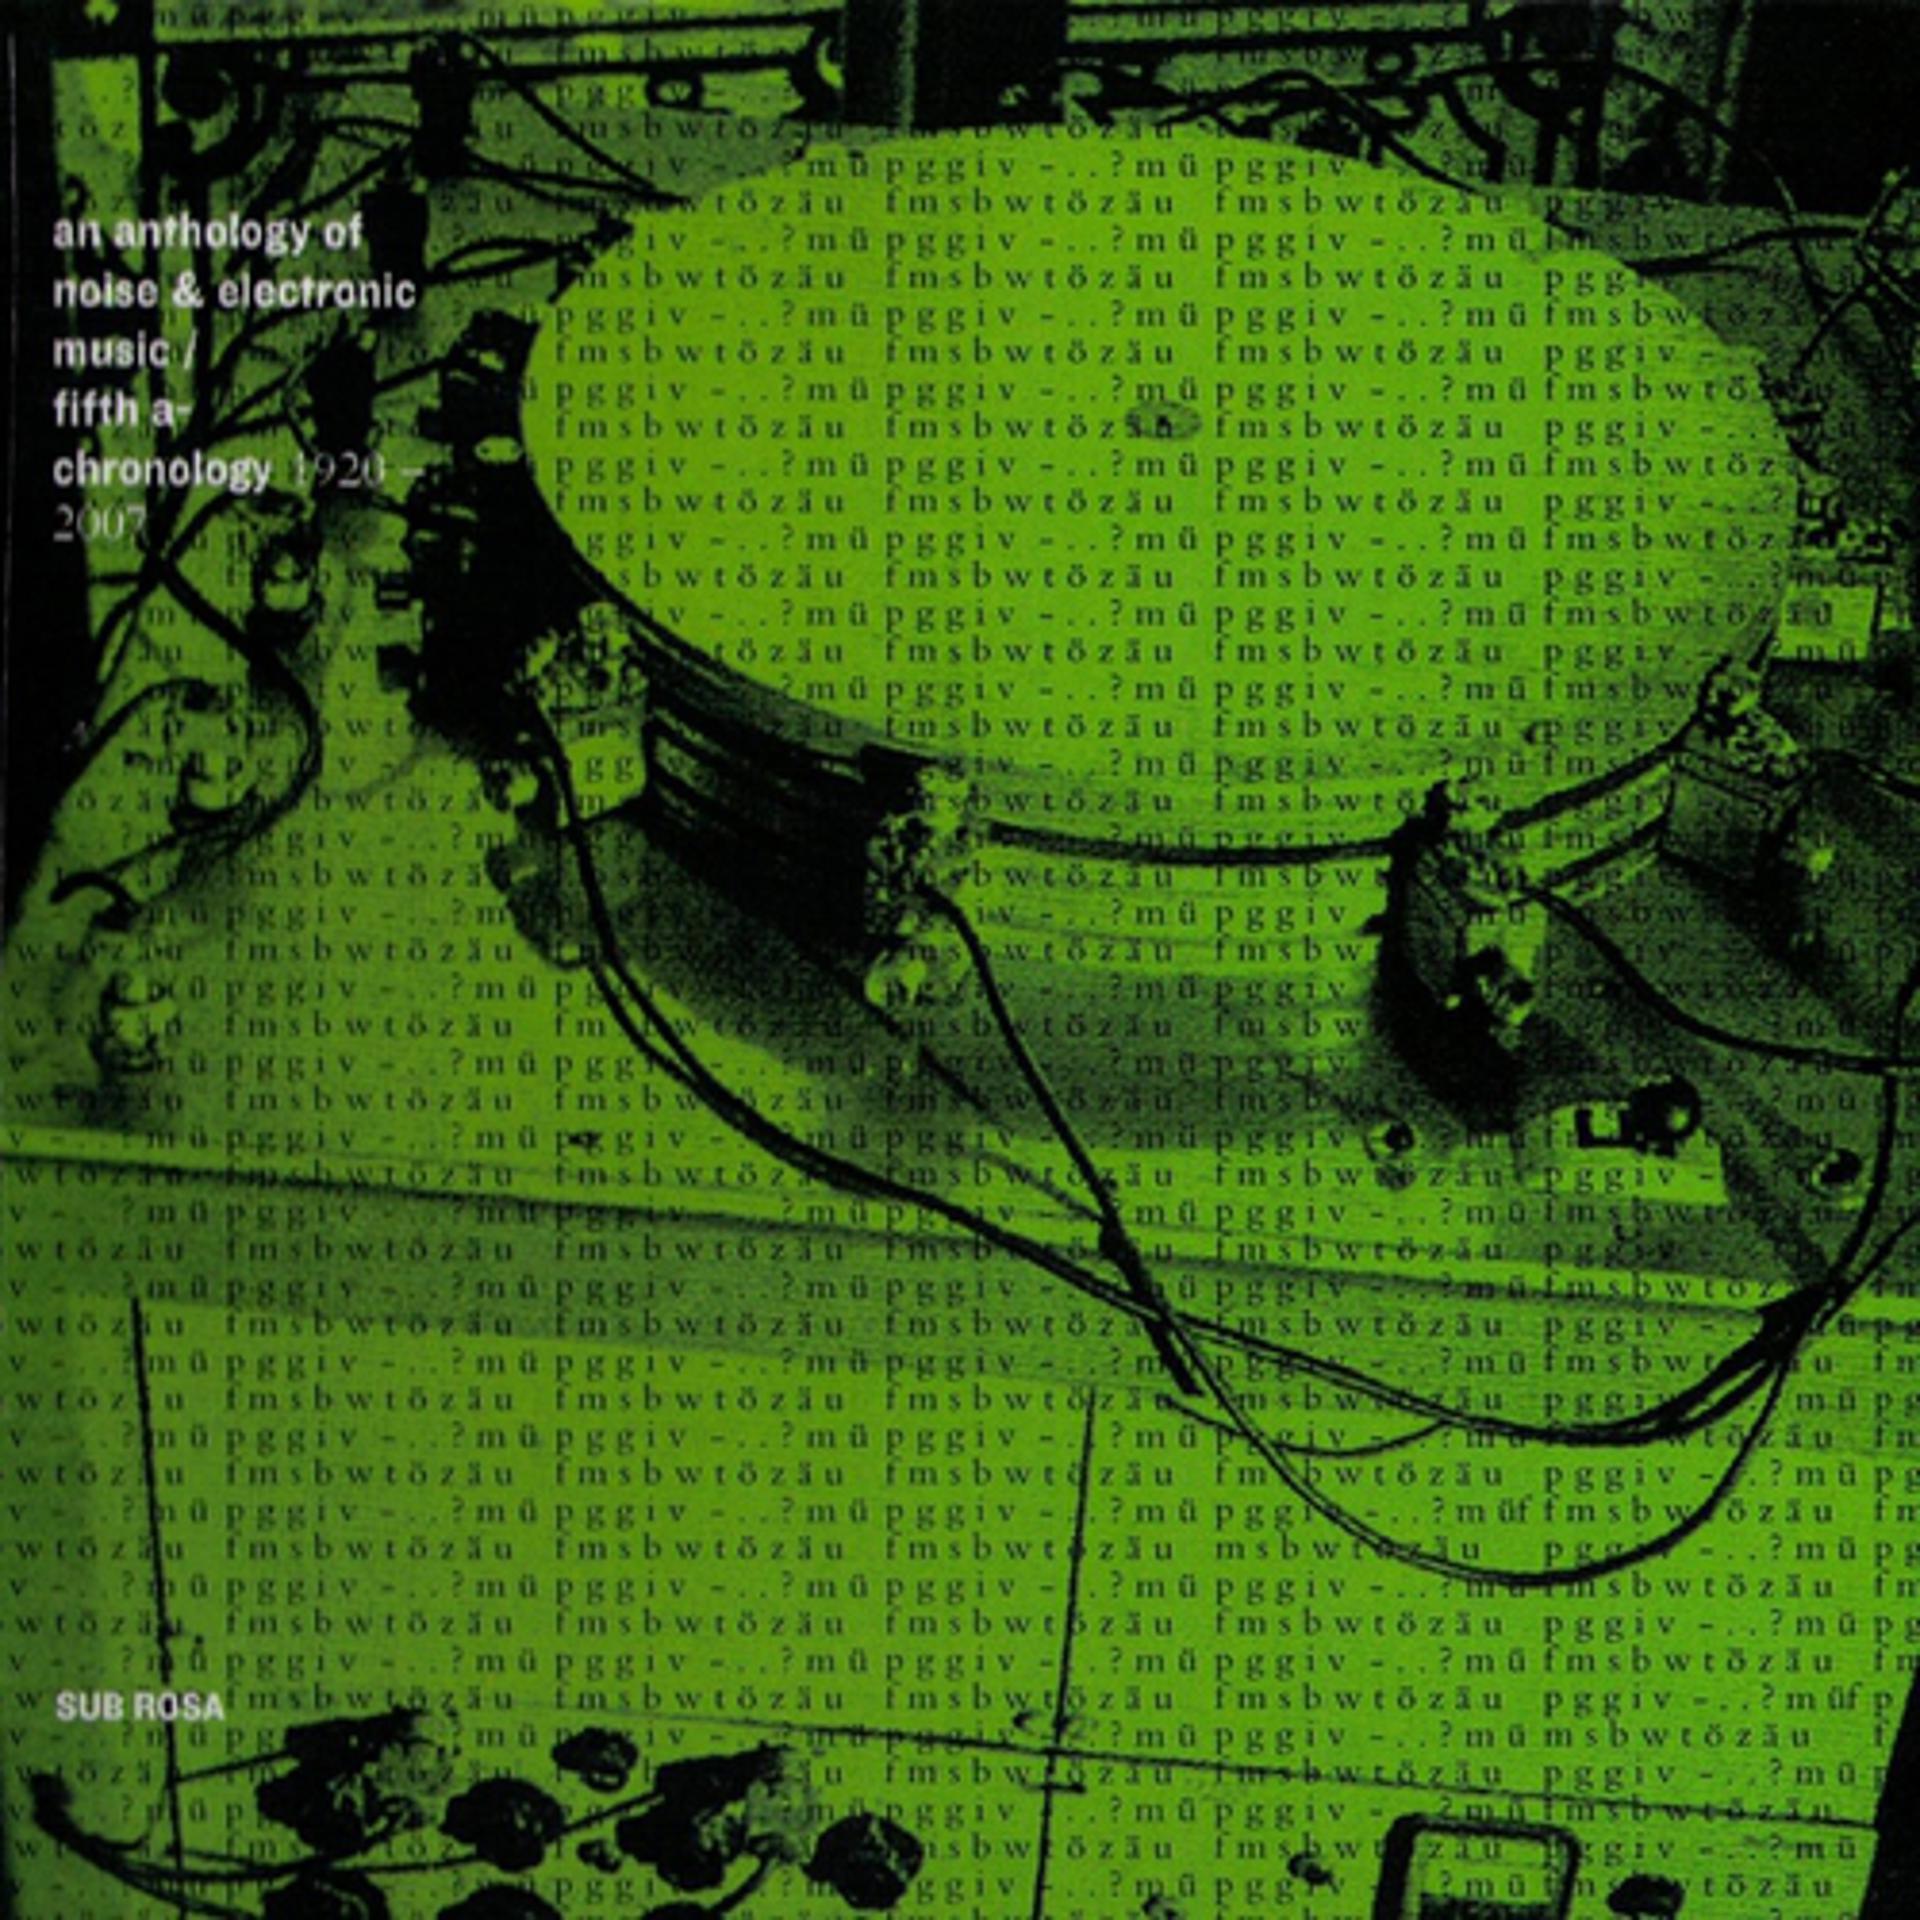 Постер альбома An anthology of noise and electronic music vol. 5 - fifth a-chronology 1920-2007